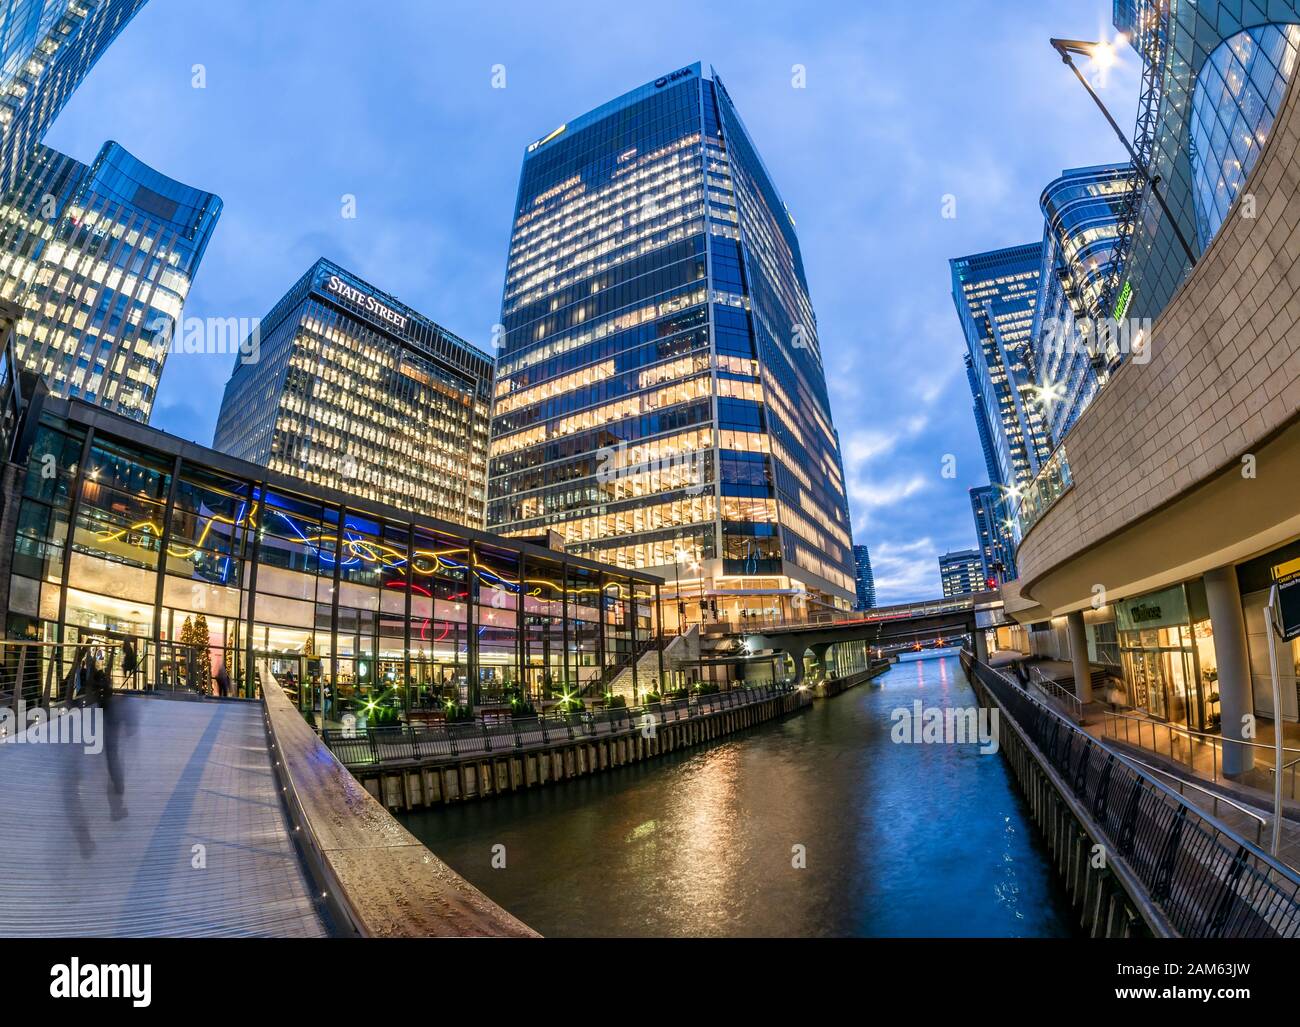 London, England, UK - December 11, 2019: Tall business buildings in Canary Wharf area, Churchill Place in One Canada Square at blue hour Stock Photo